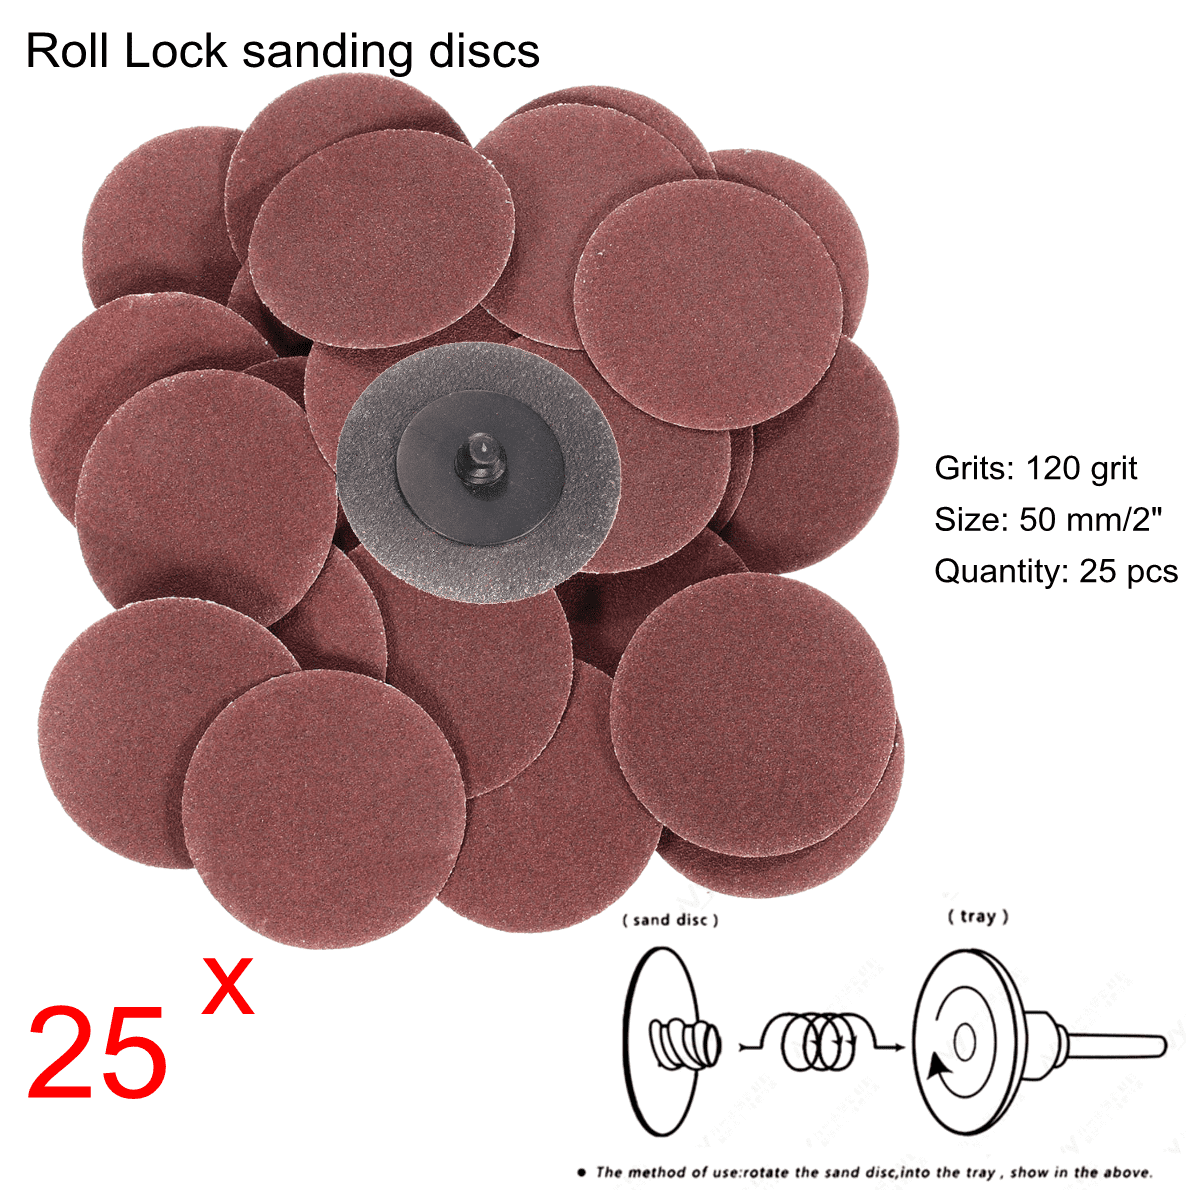 50Pcs 2 inch 120 Grit Roloc Sanding Discs Roll Lock R Type Pad For Drill 25